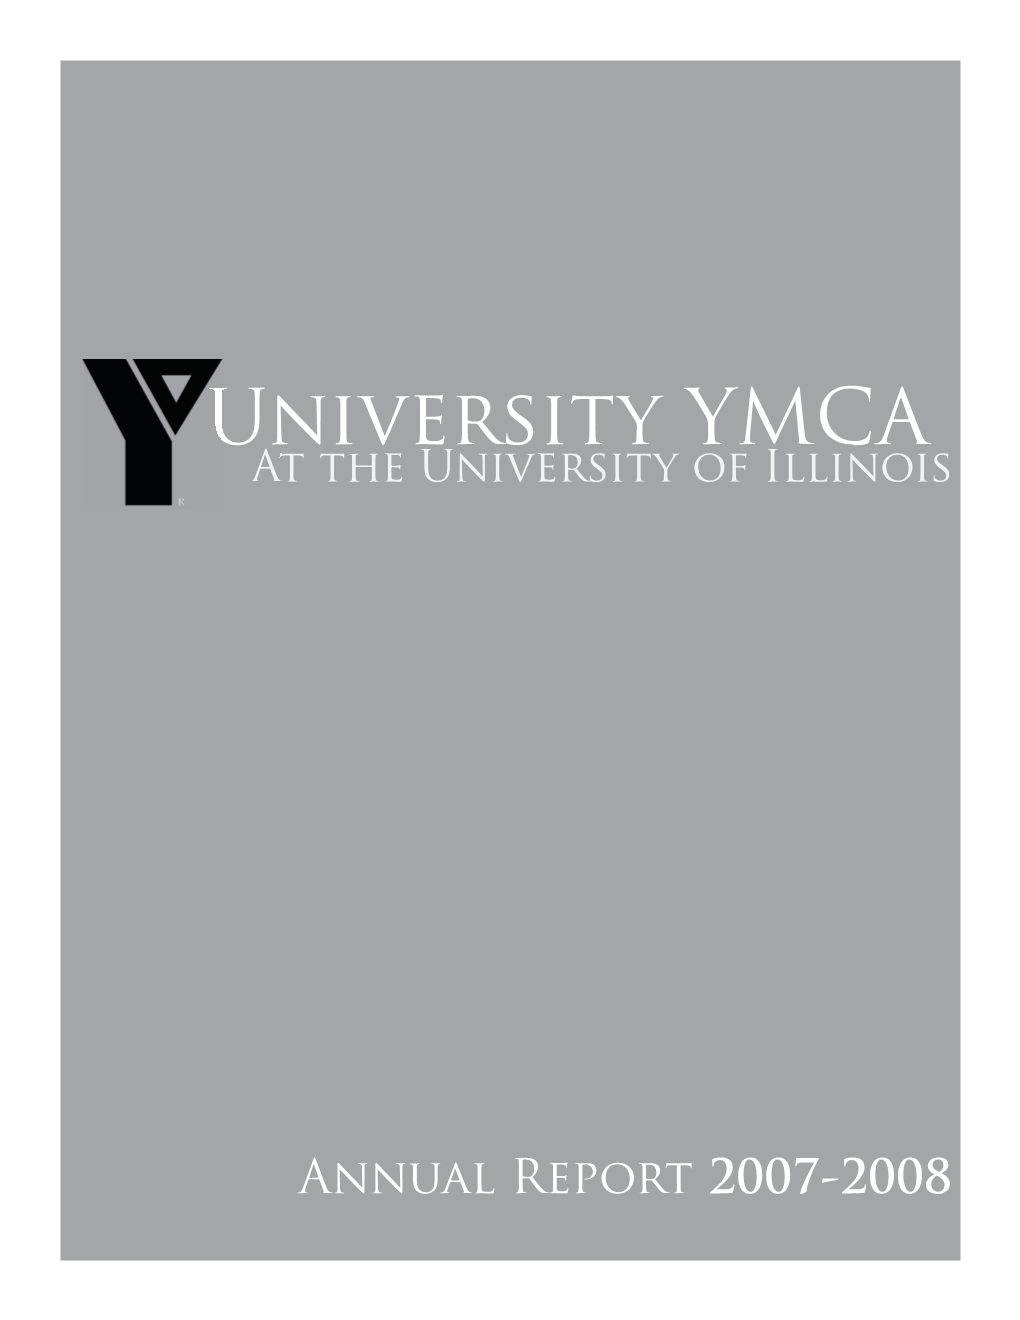 Annual Report 2007-2008 Annual Report 2007-2008 University YMCA the ASSOCIATION MISSION, GOALS, and OBJECTIVES